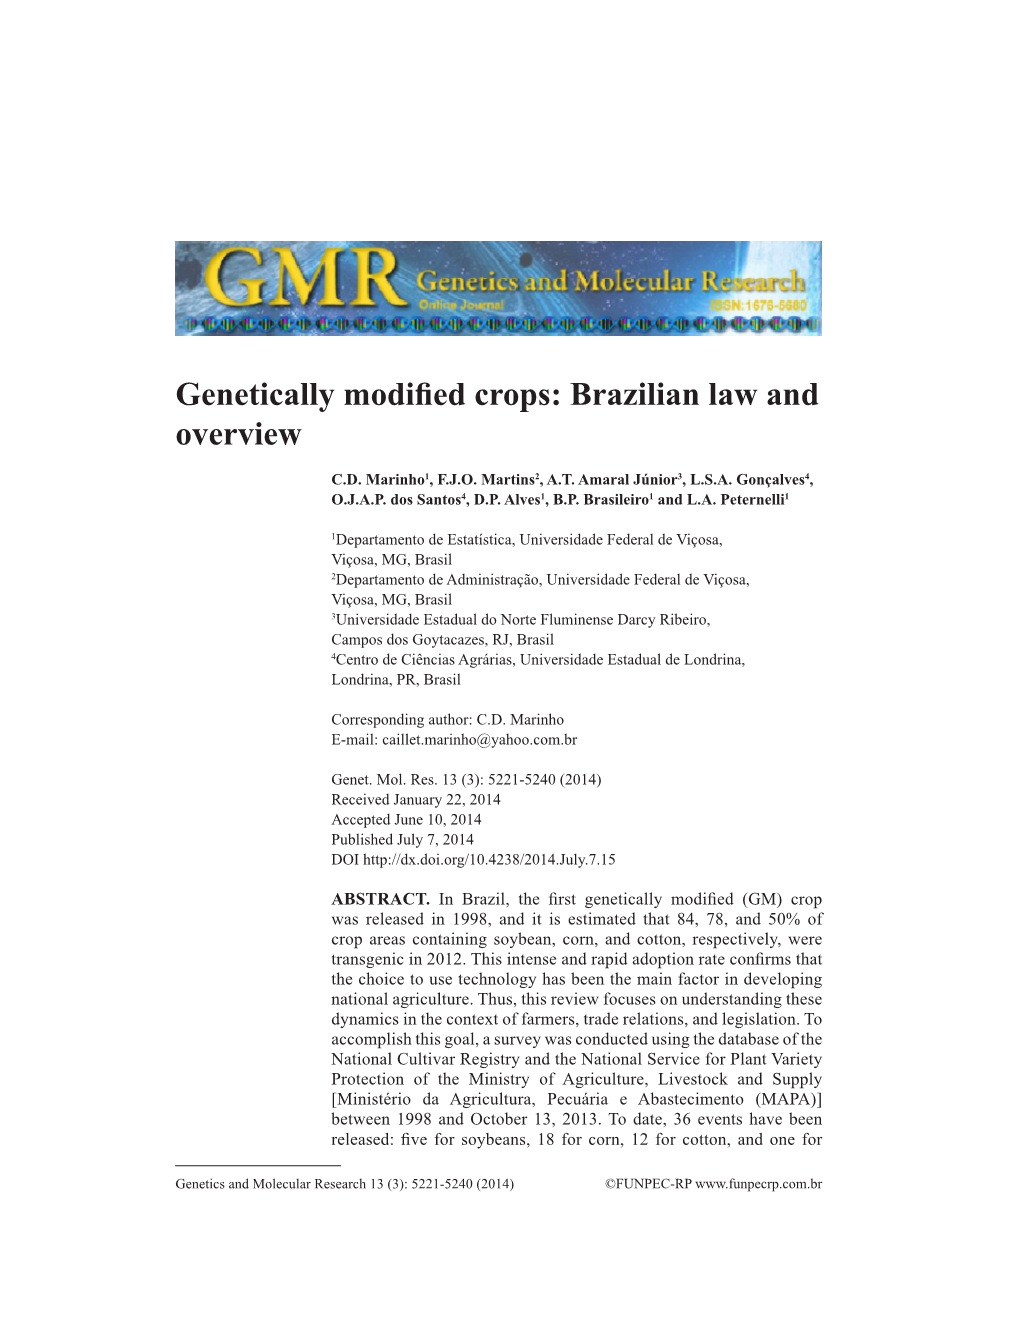 Genetically Modified Crops: Brazilian Law and Overview